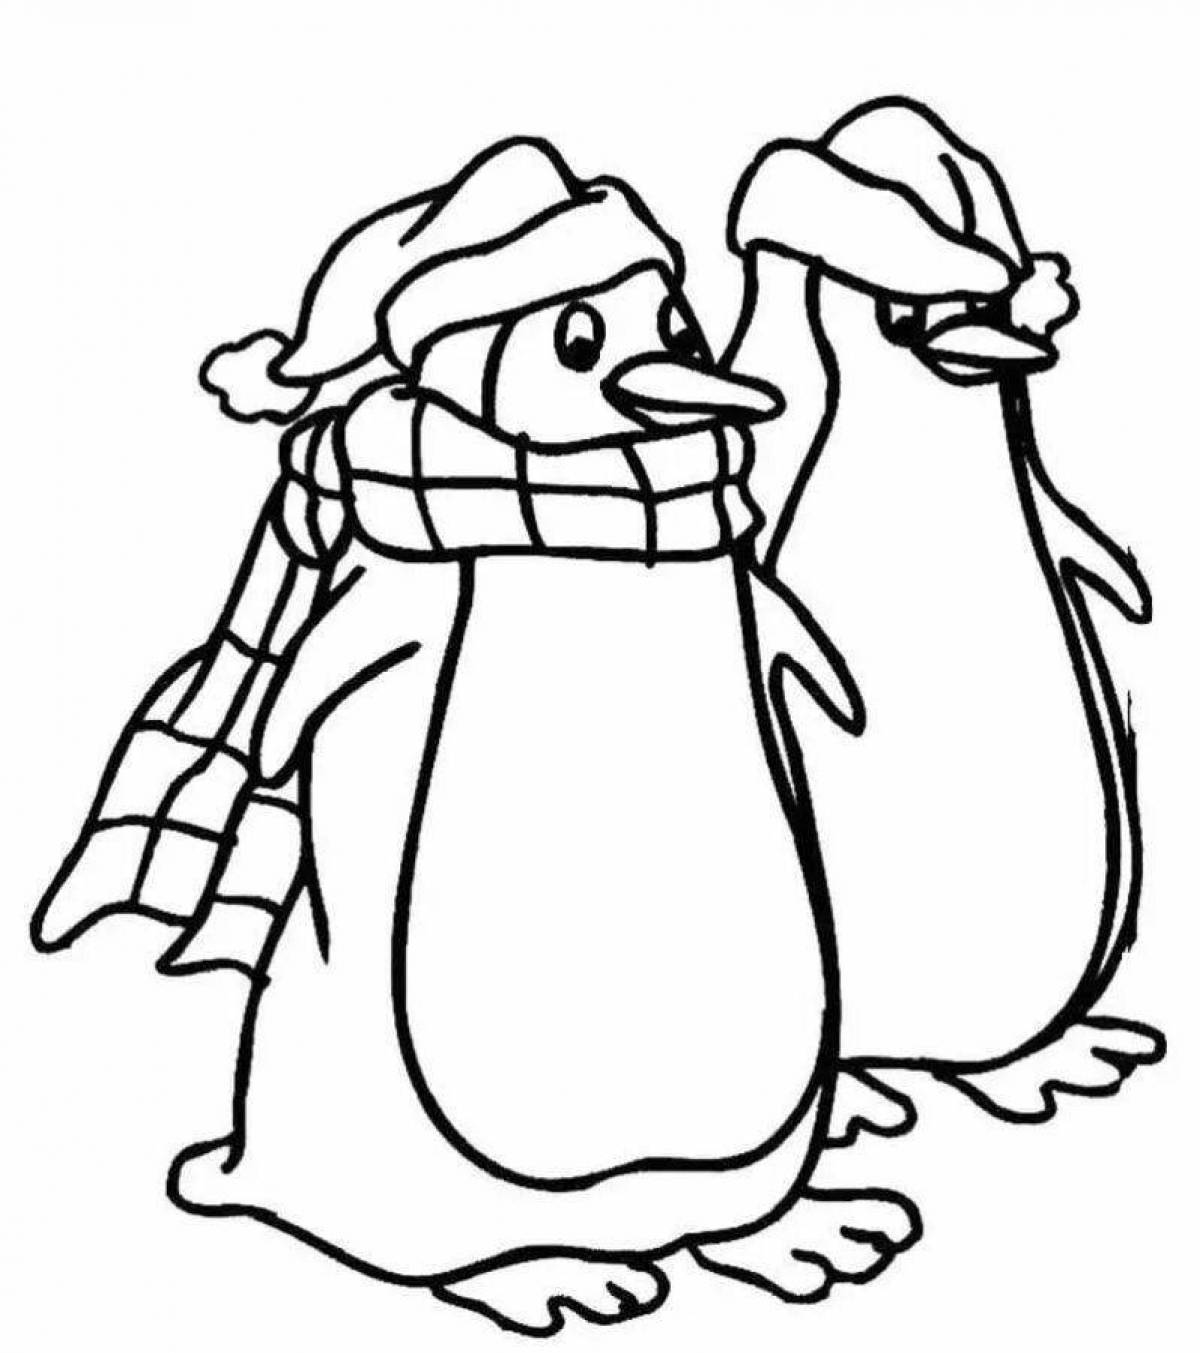 Shiny penguin coloring book